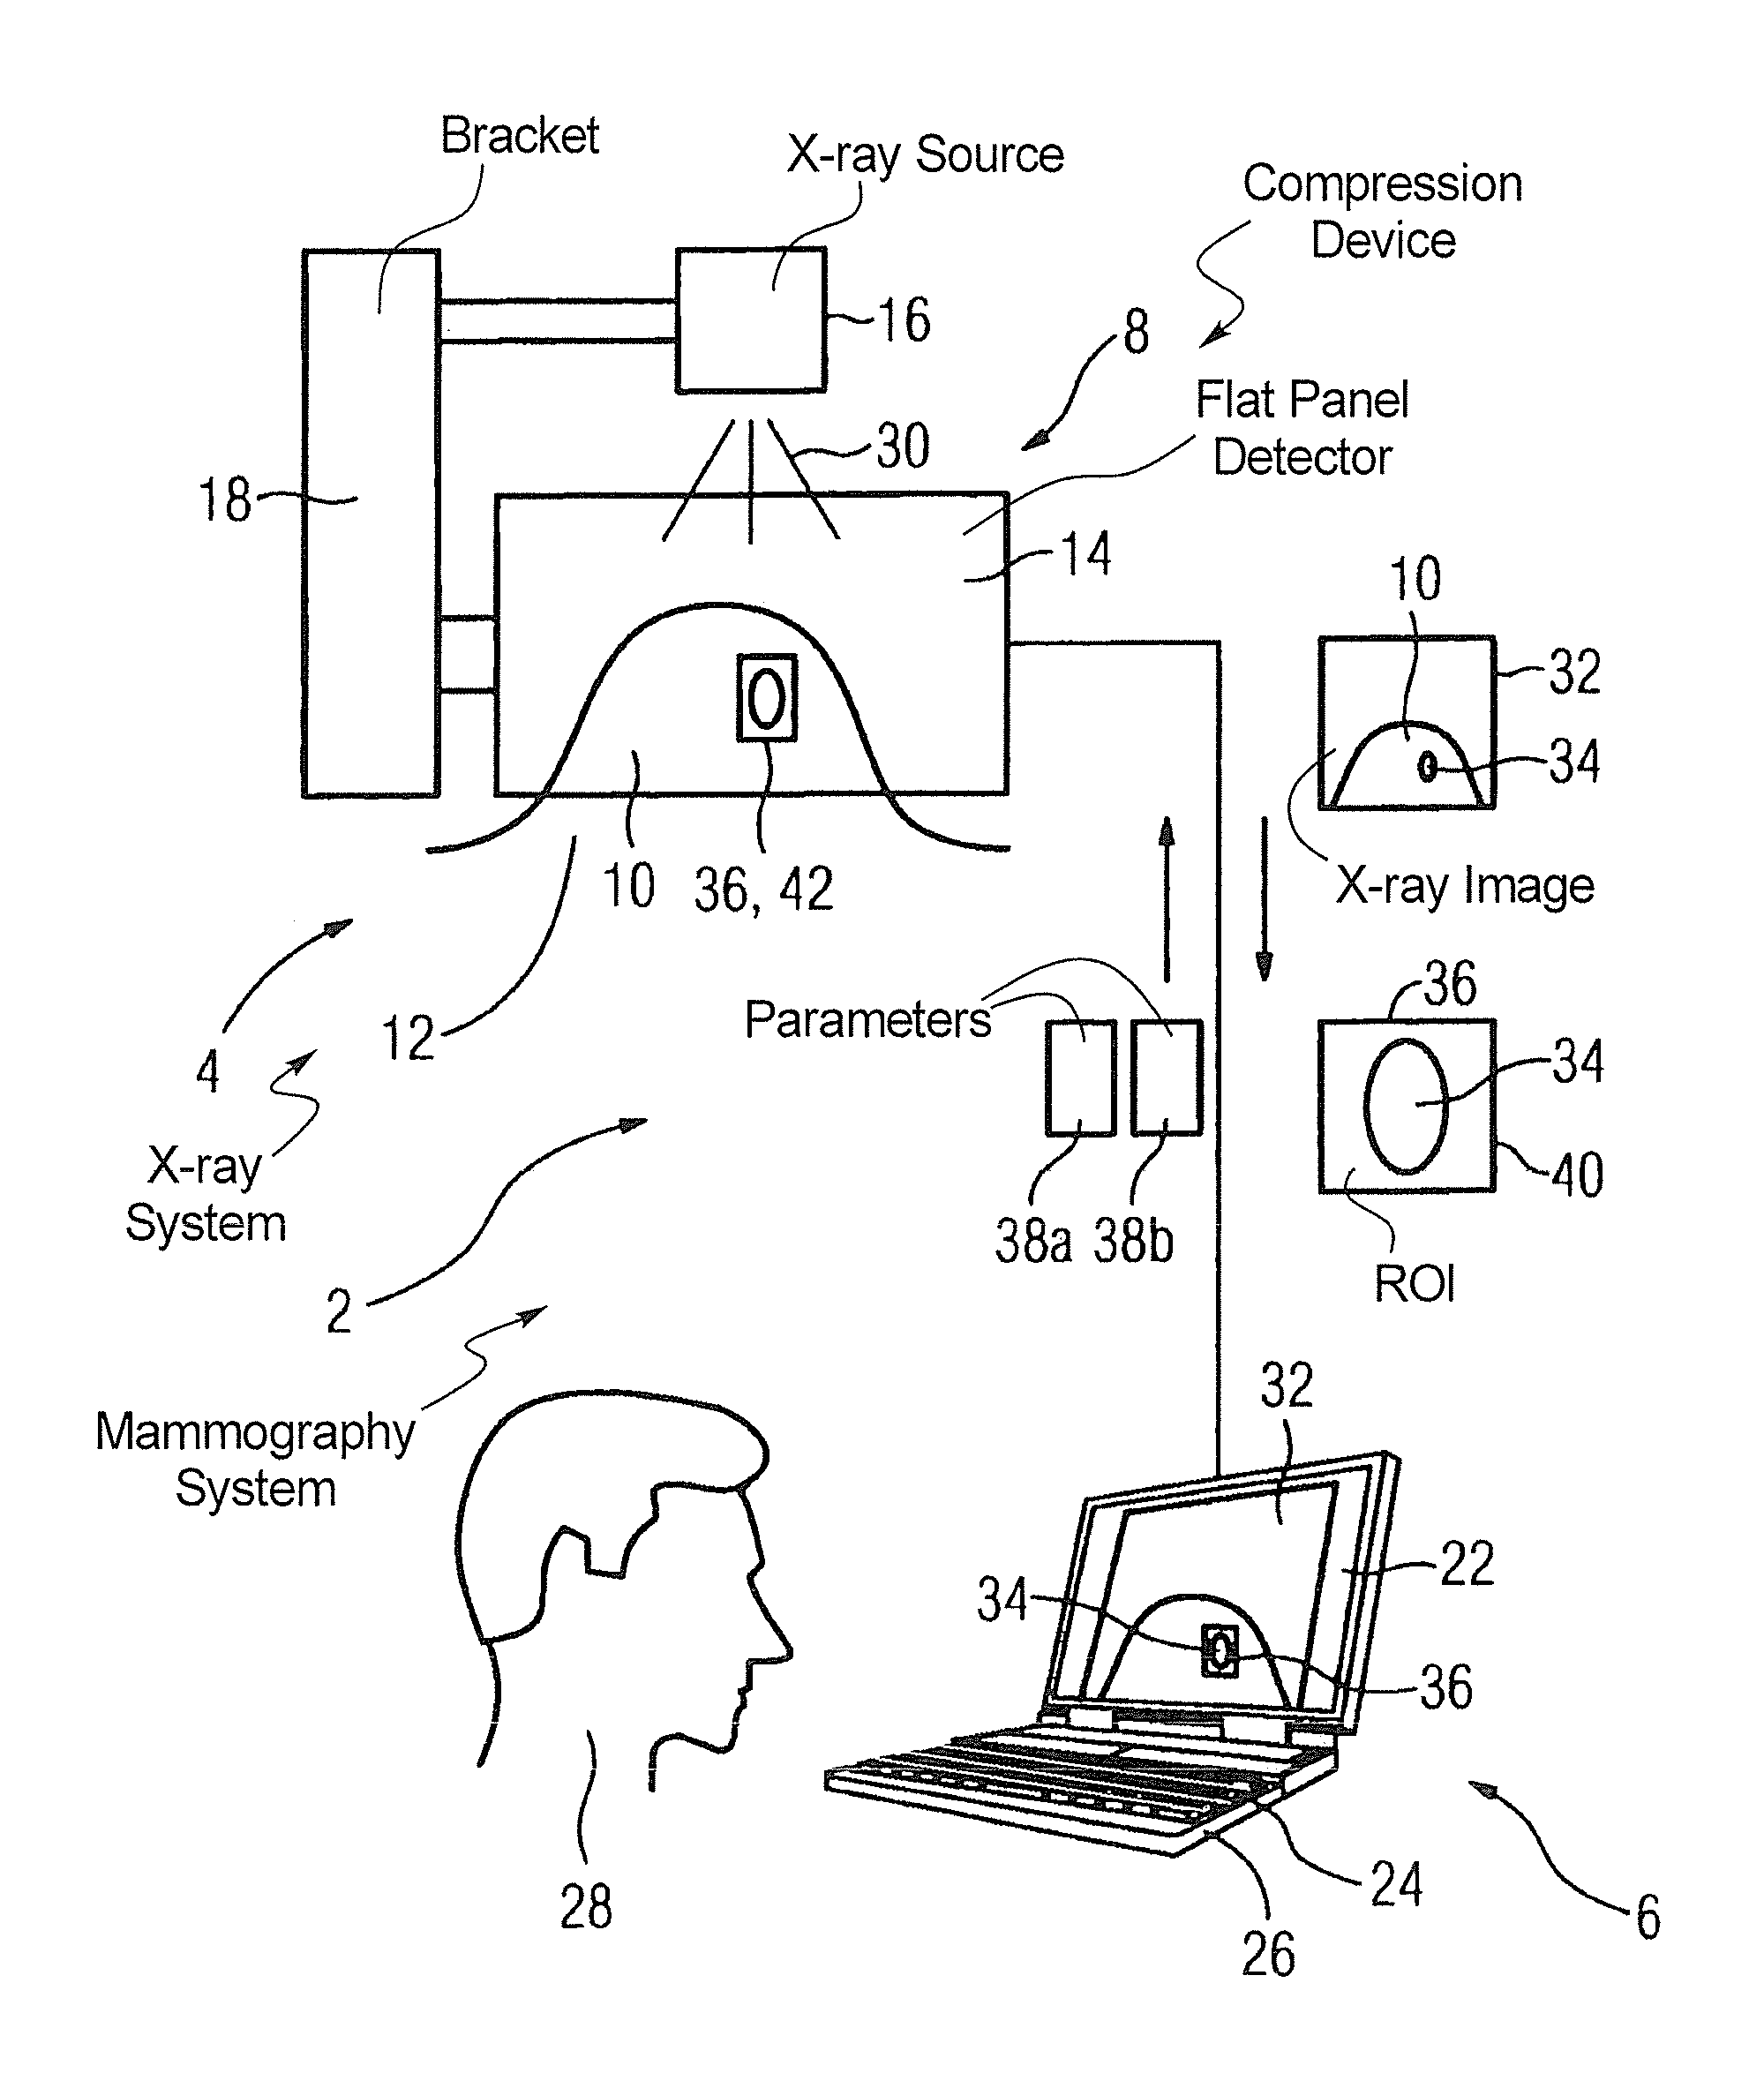 Method for producing an X-ray image during a mammography